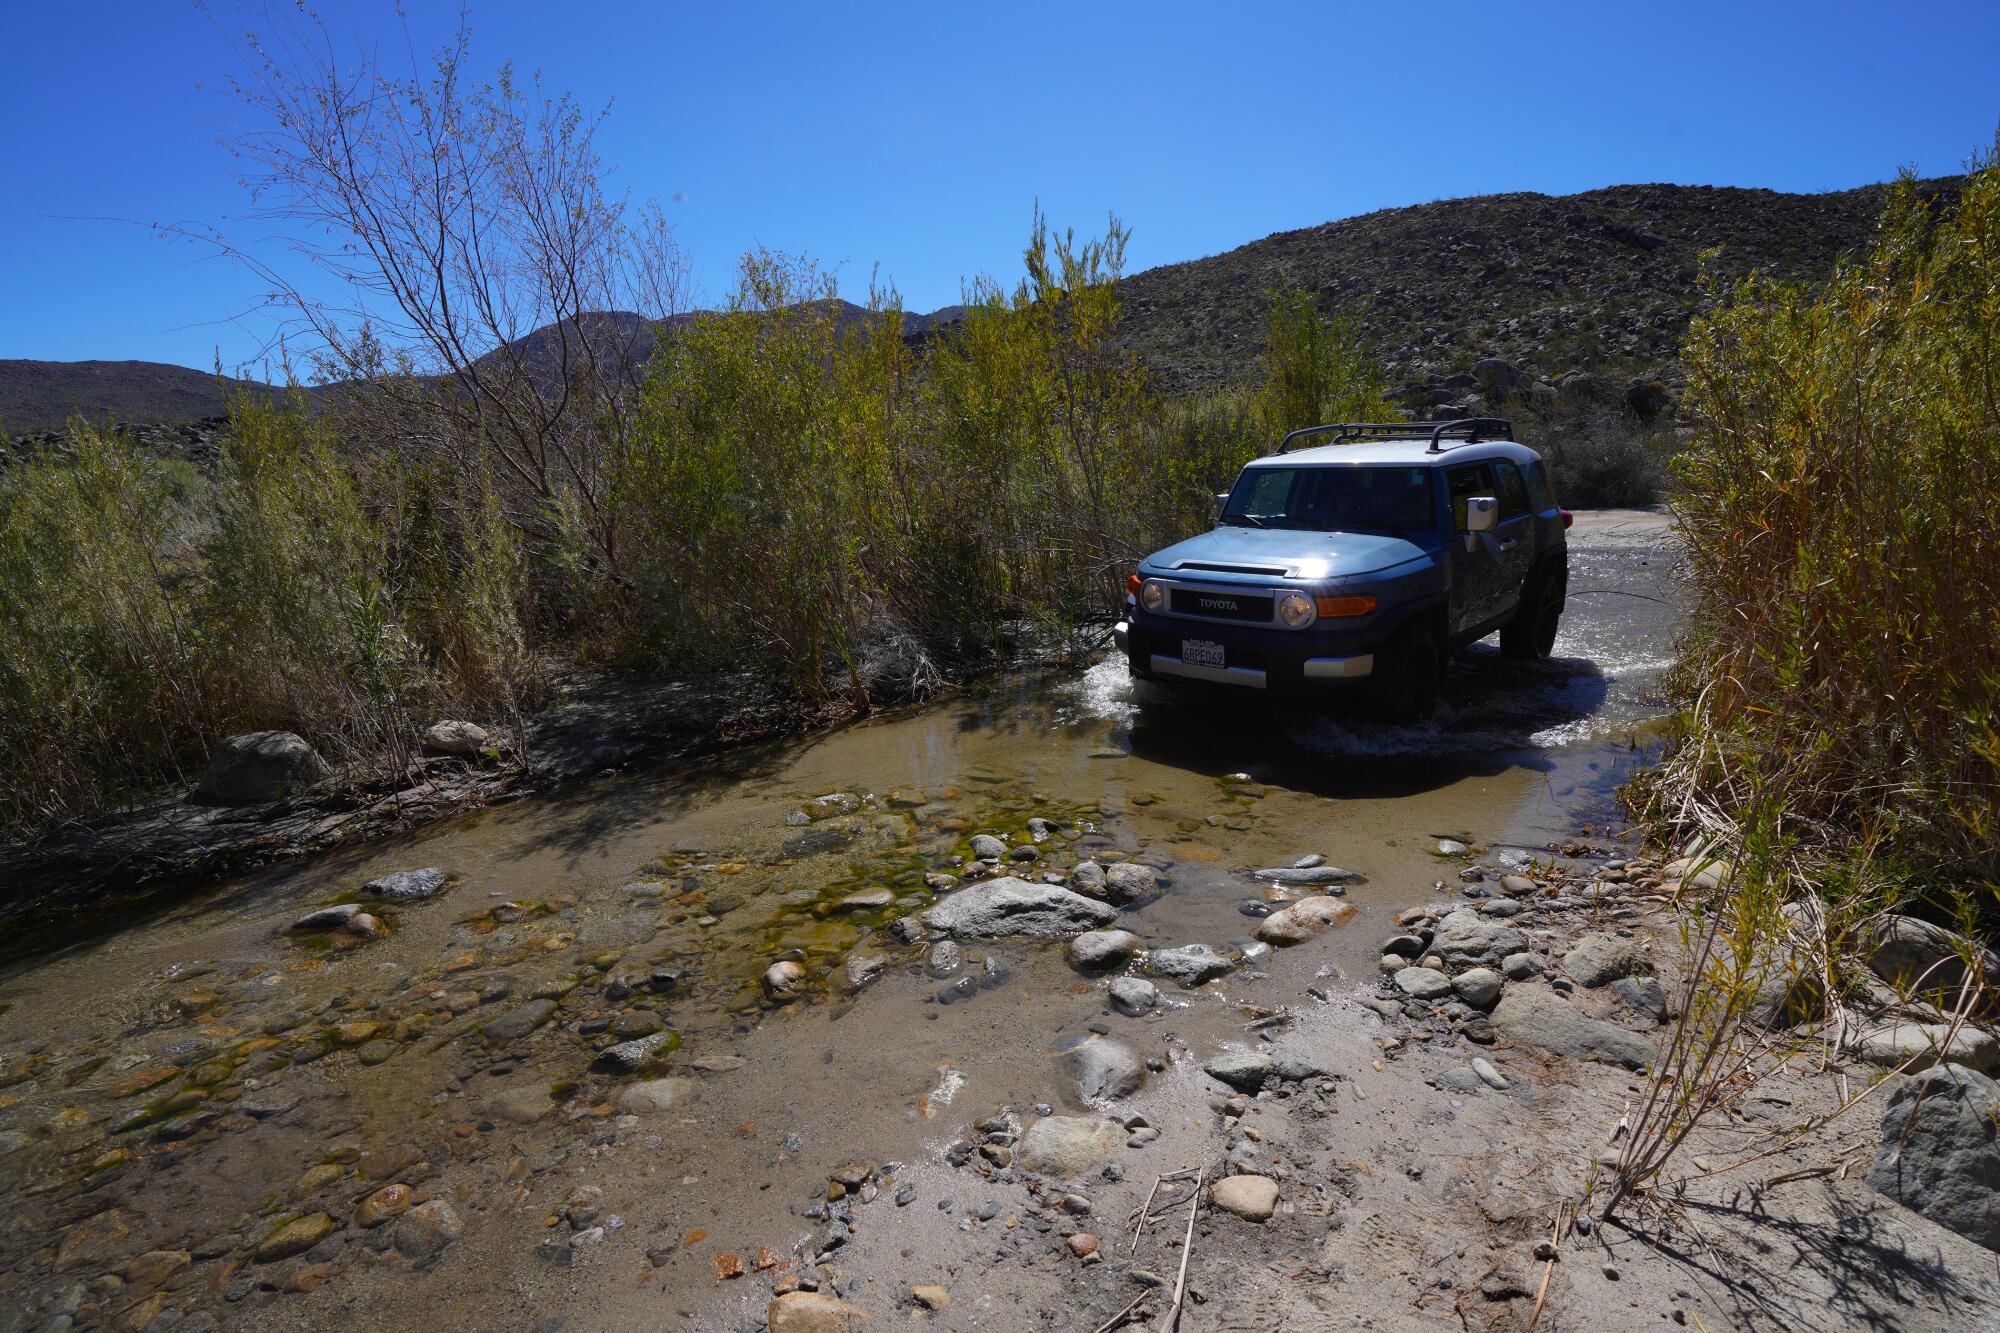 Robert Logan and his wife, Anne, from Orange navigate their vehicle across one of the water streams